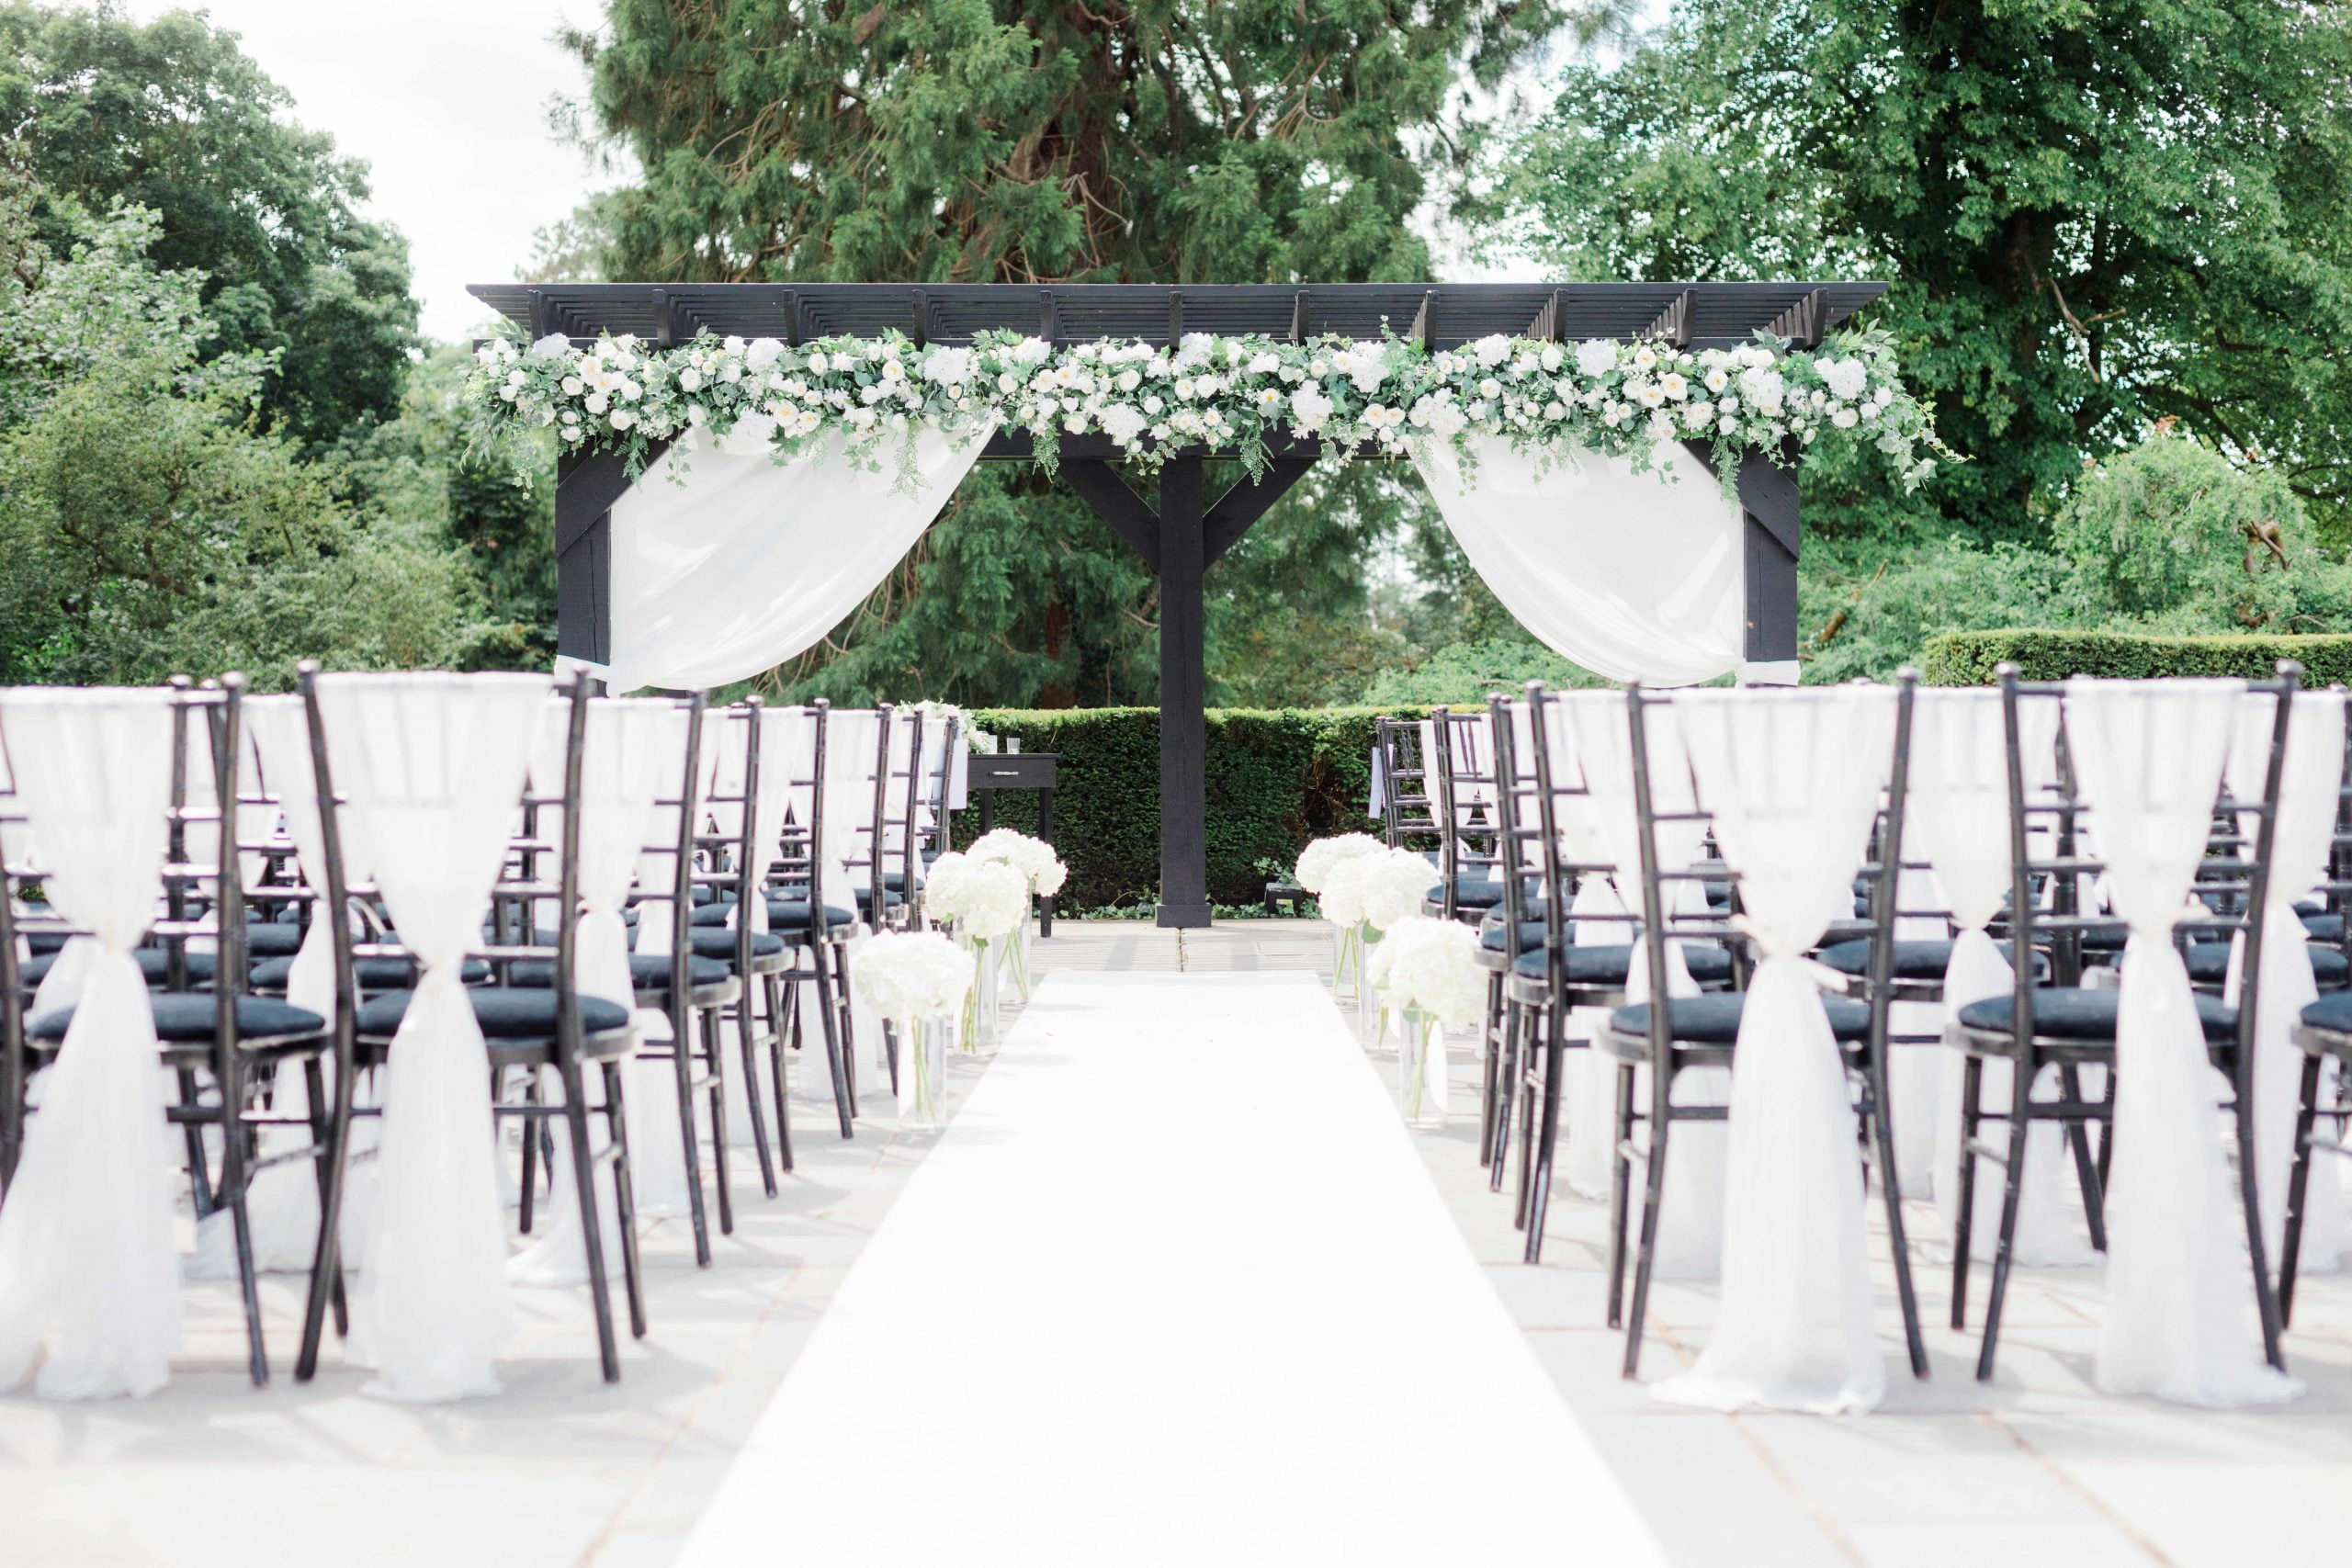 The pergola and ceremony chairs dressed in white voile for an outdoor wedding cerfemony at Swynford manor